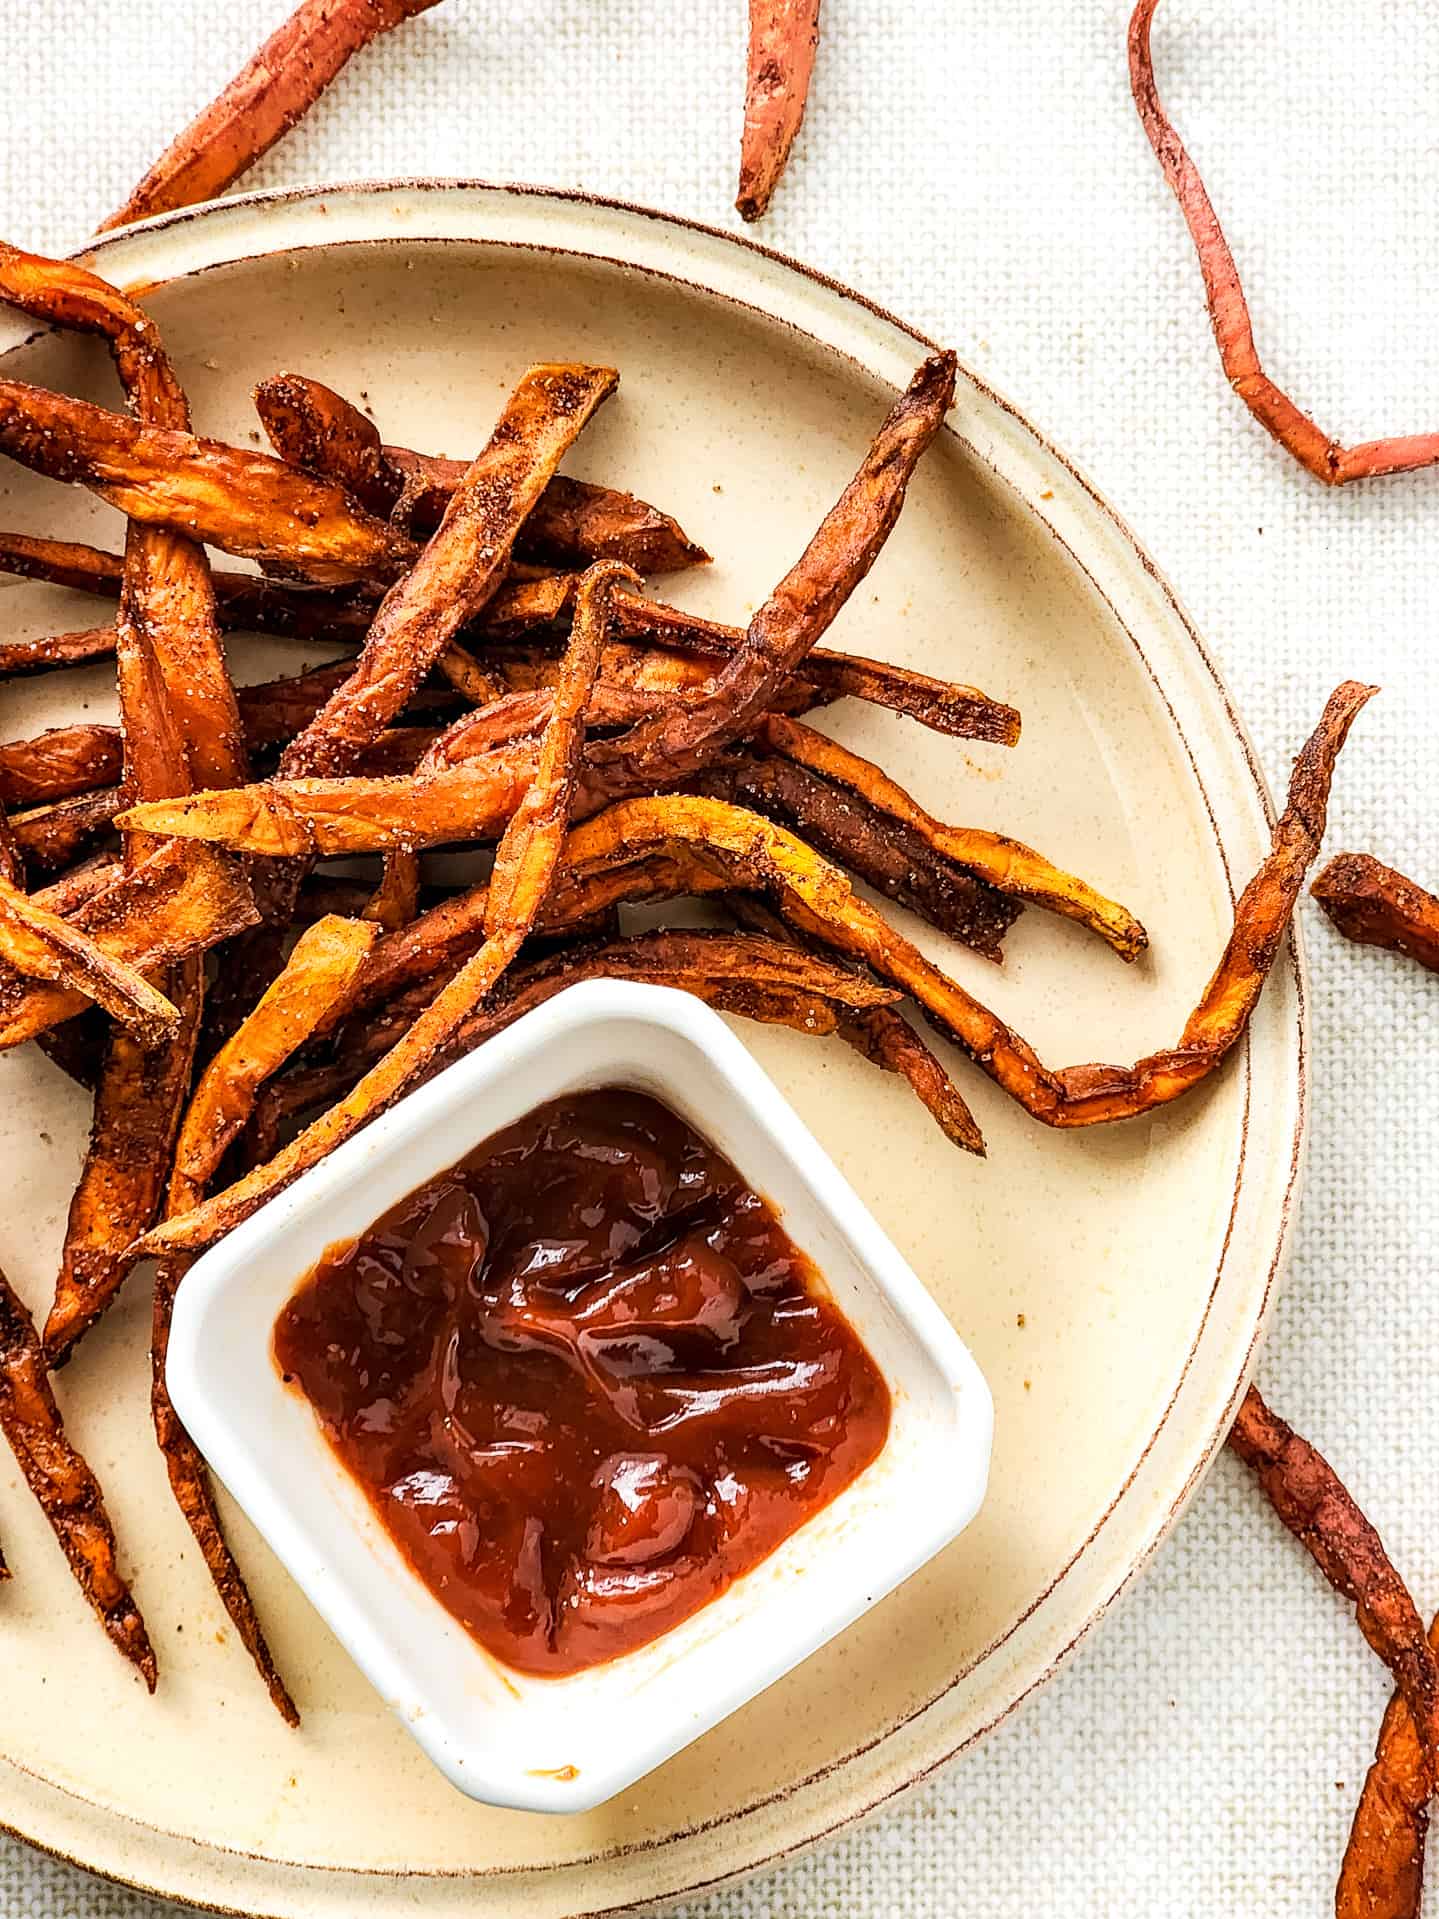 Top down view of sweet potato fries and ketchup on a plate.